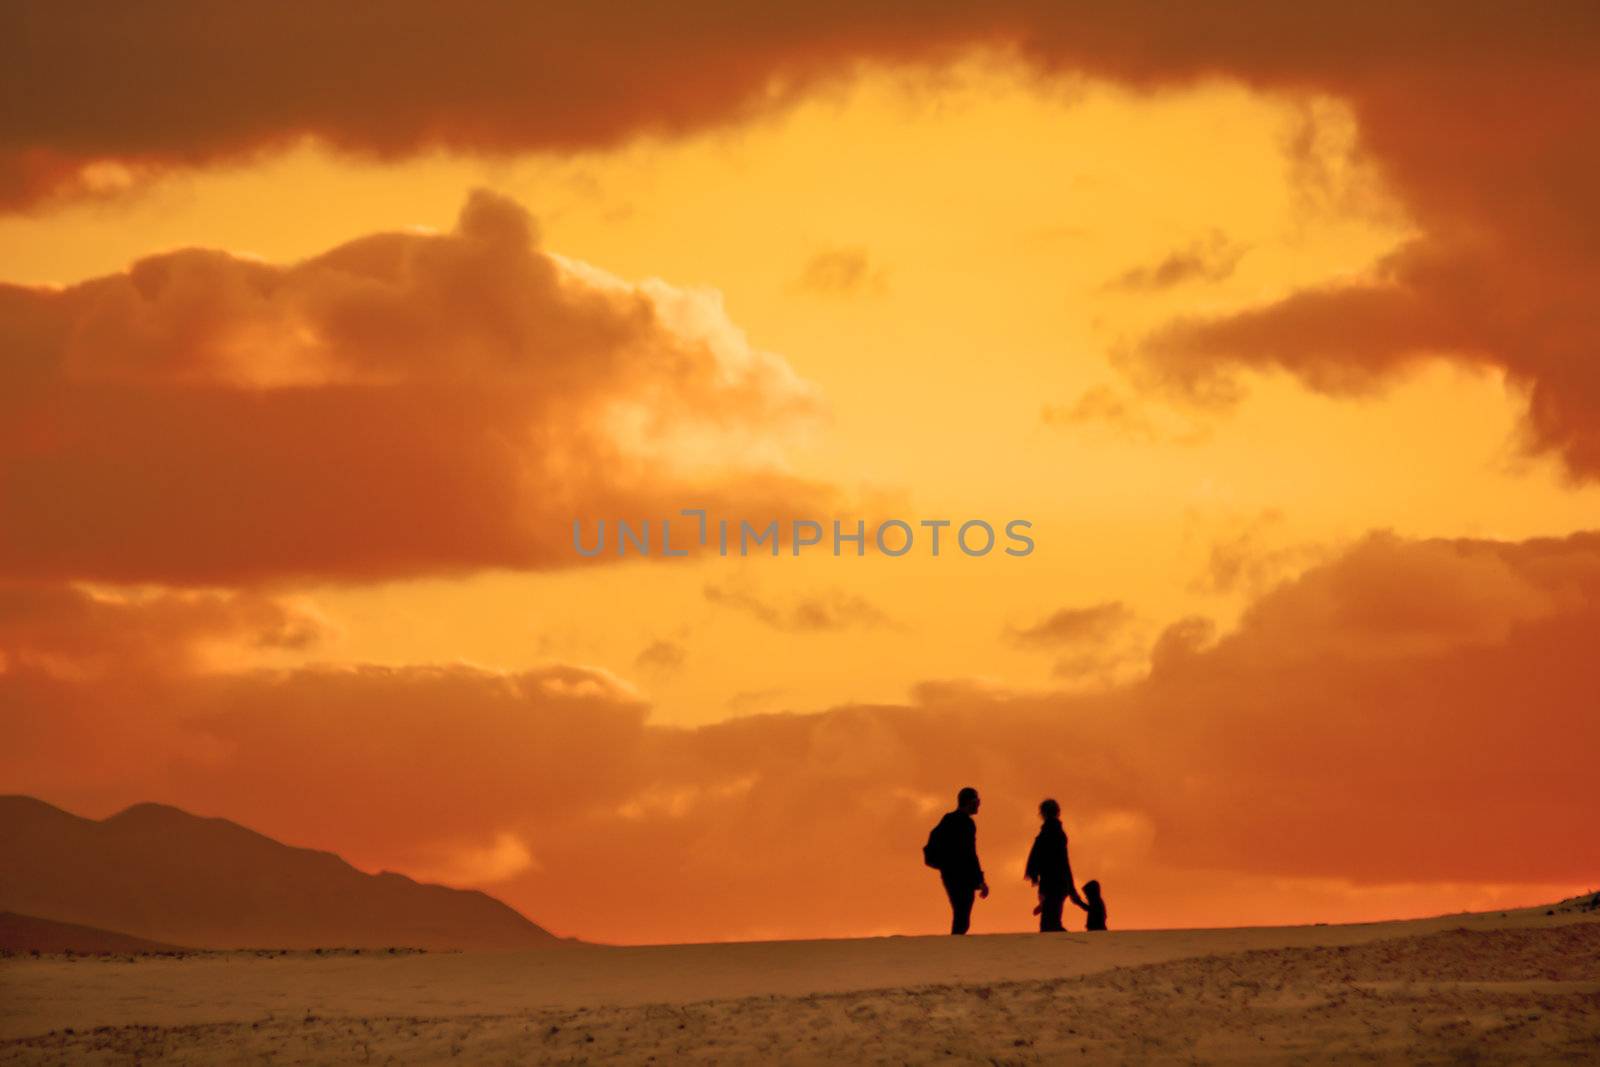 Silhouette of the family on their evening trip in the desert